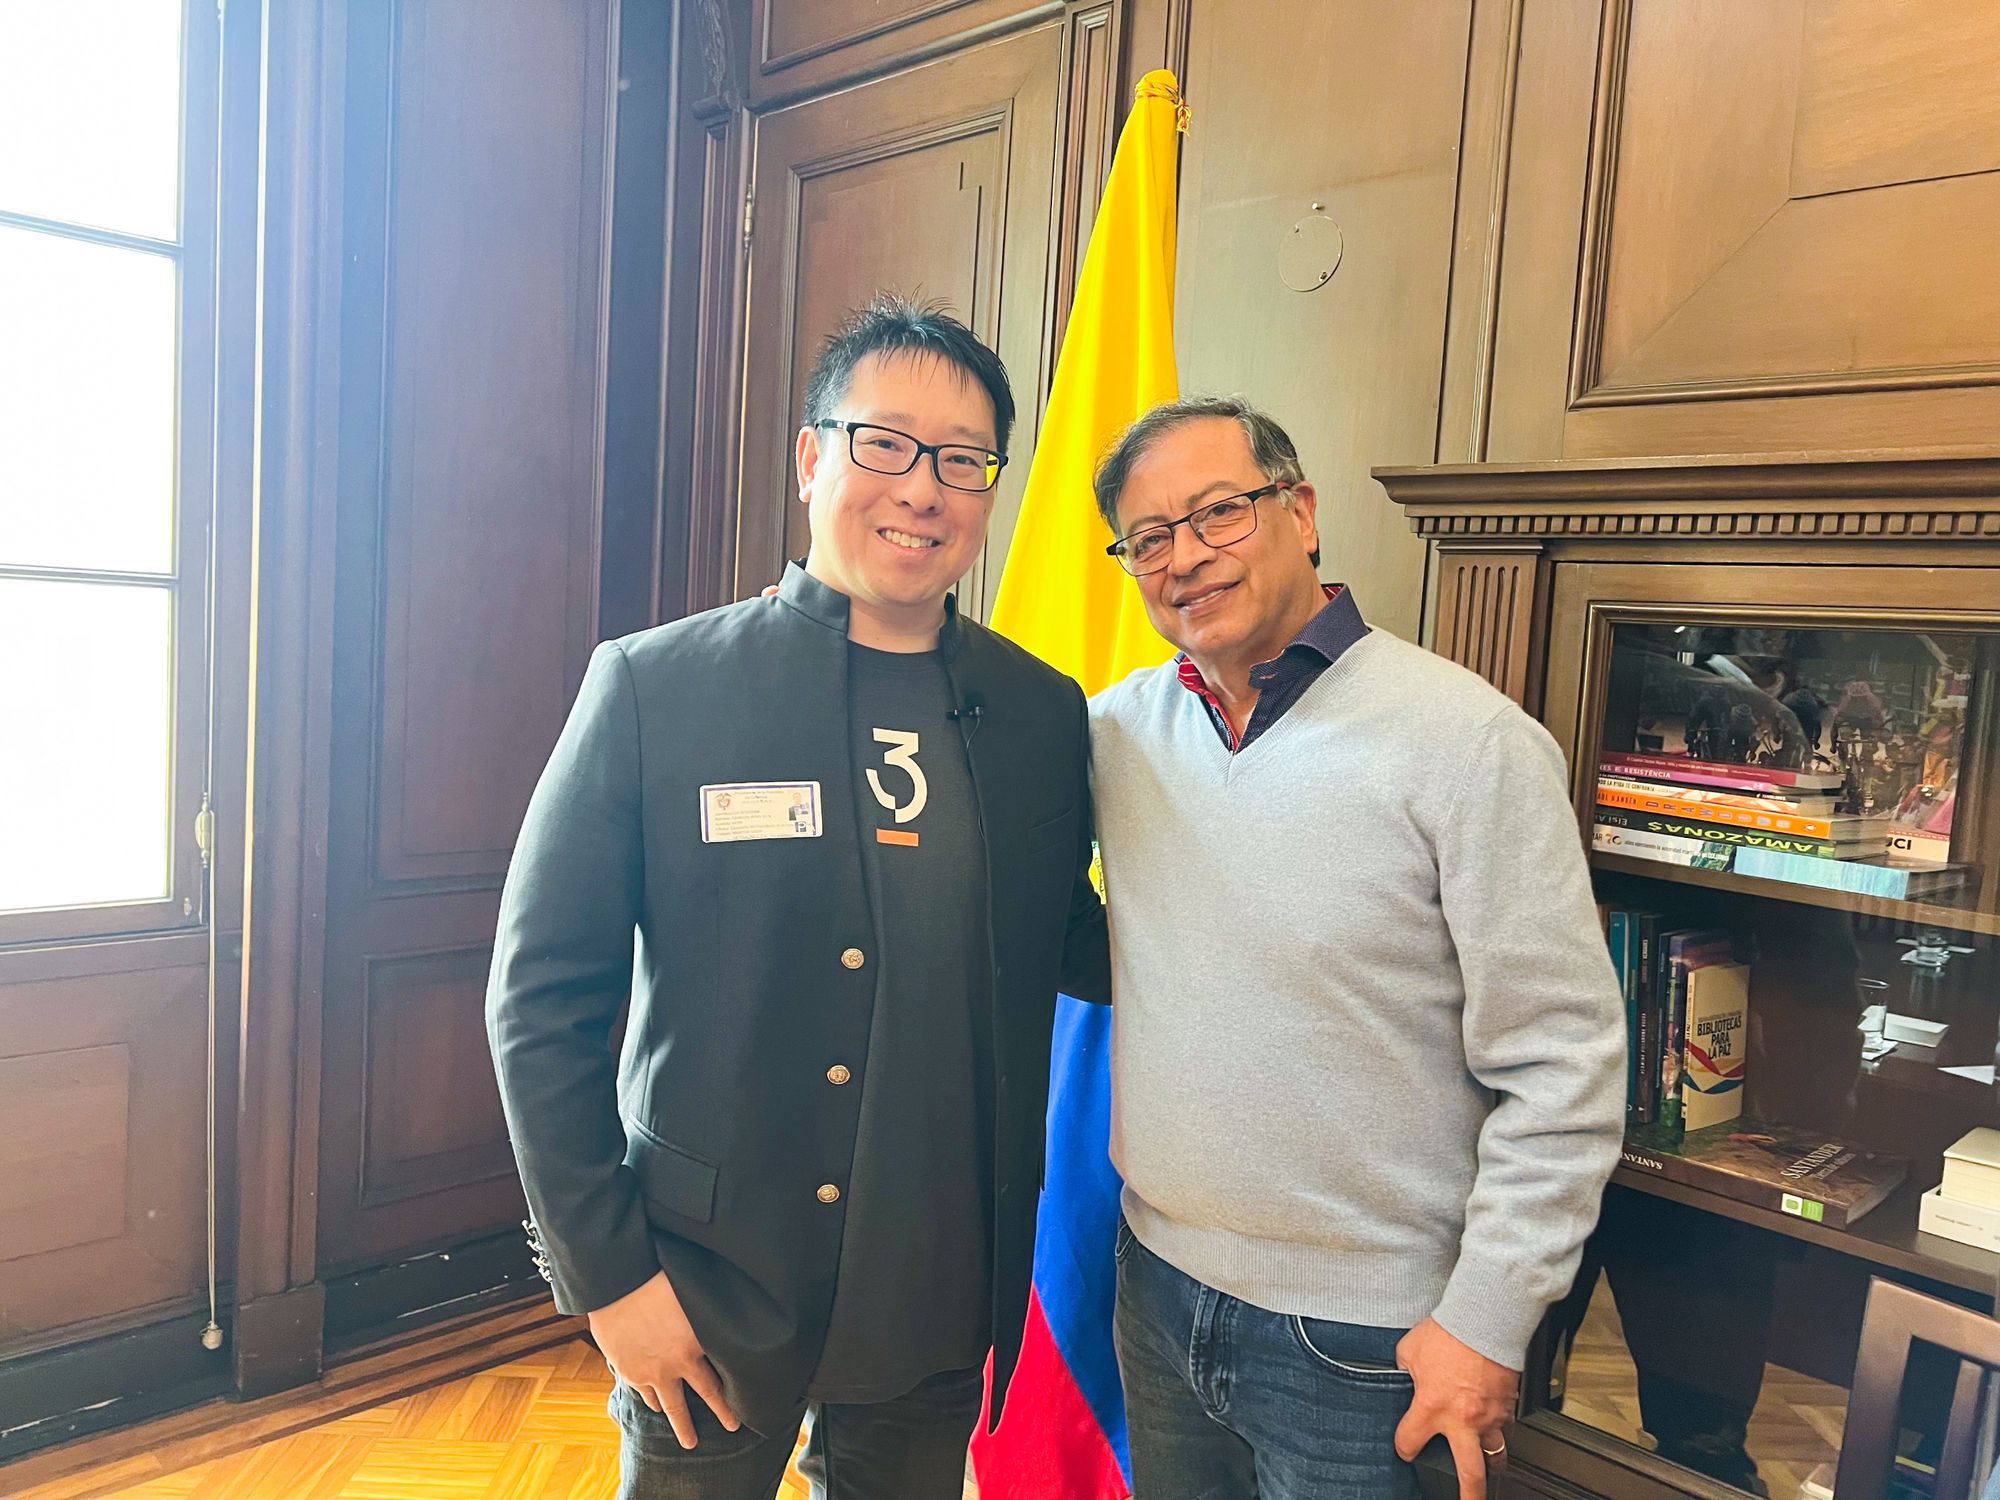 JAN3 CEO Samson Mow poses for photo with Colombia president Gustavo Petro.